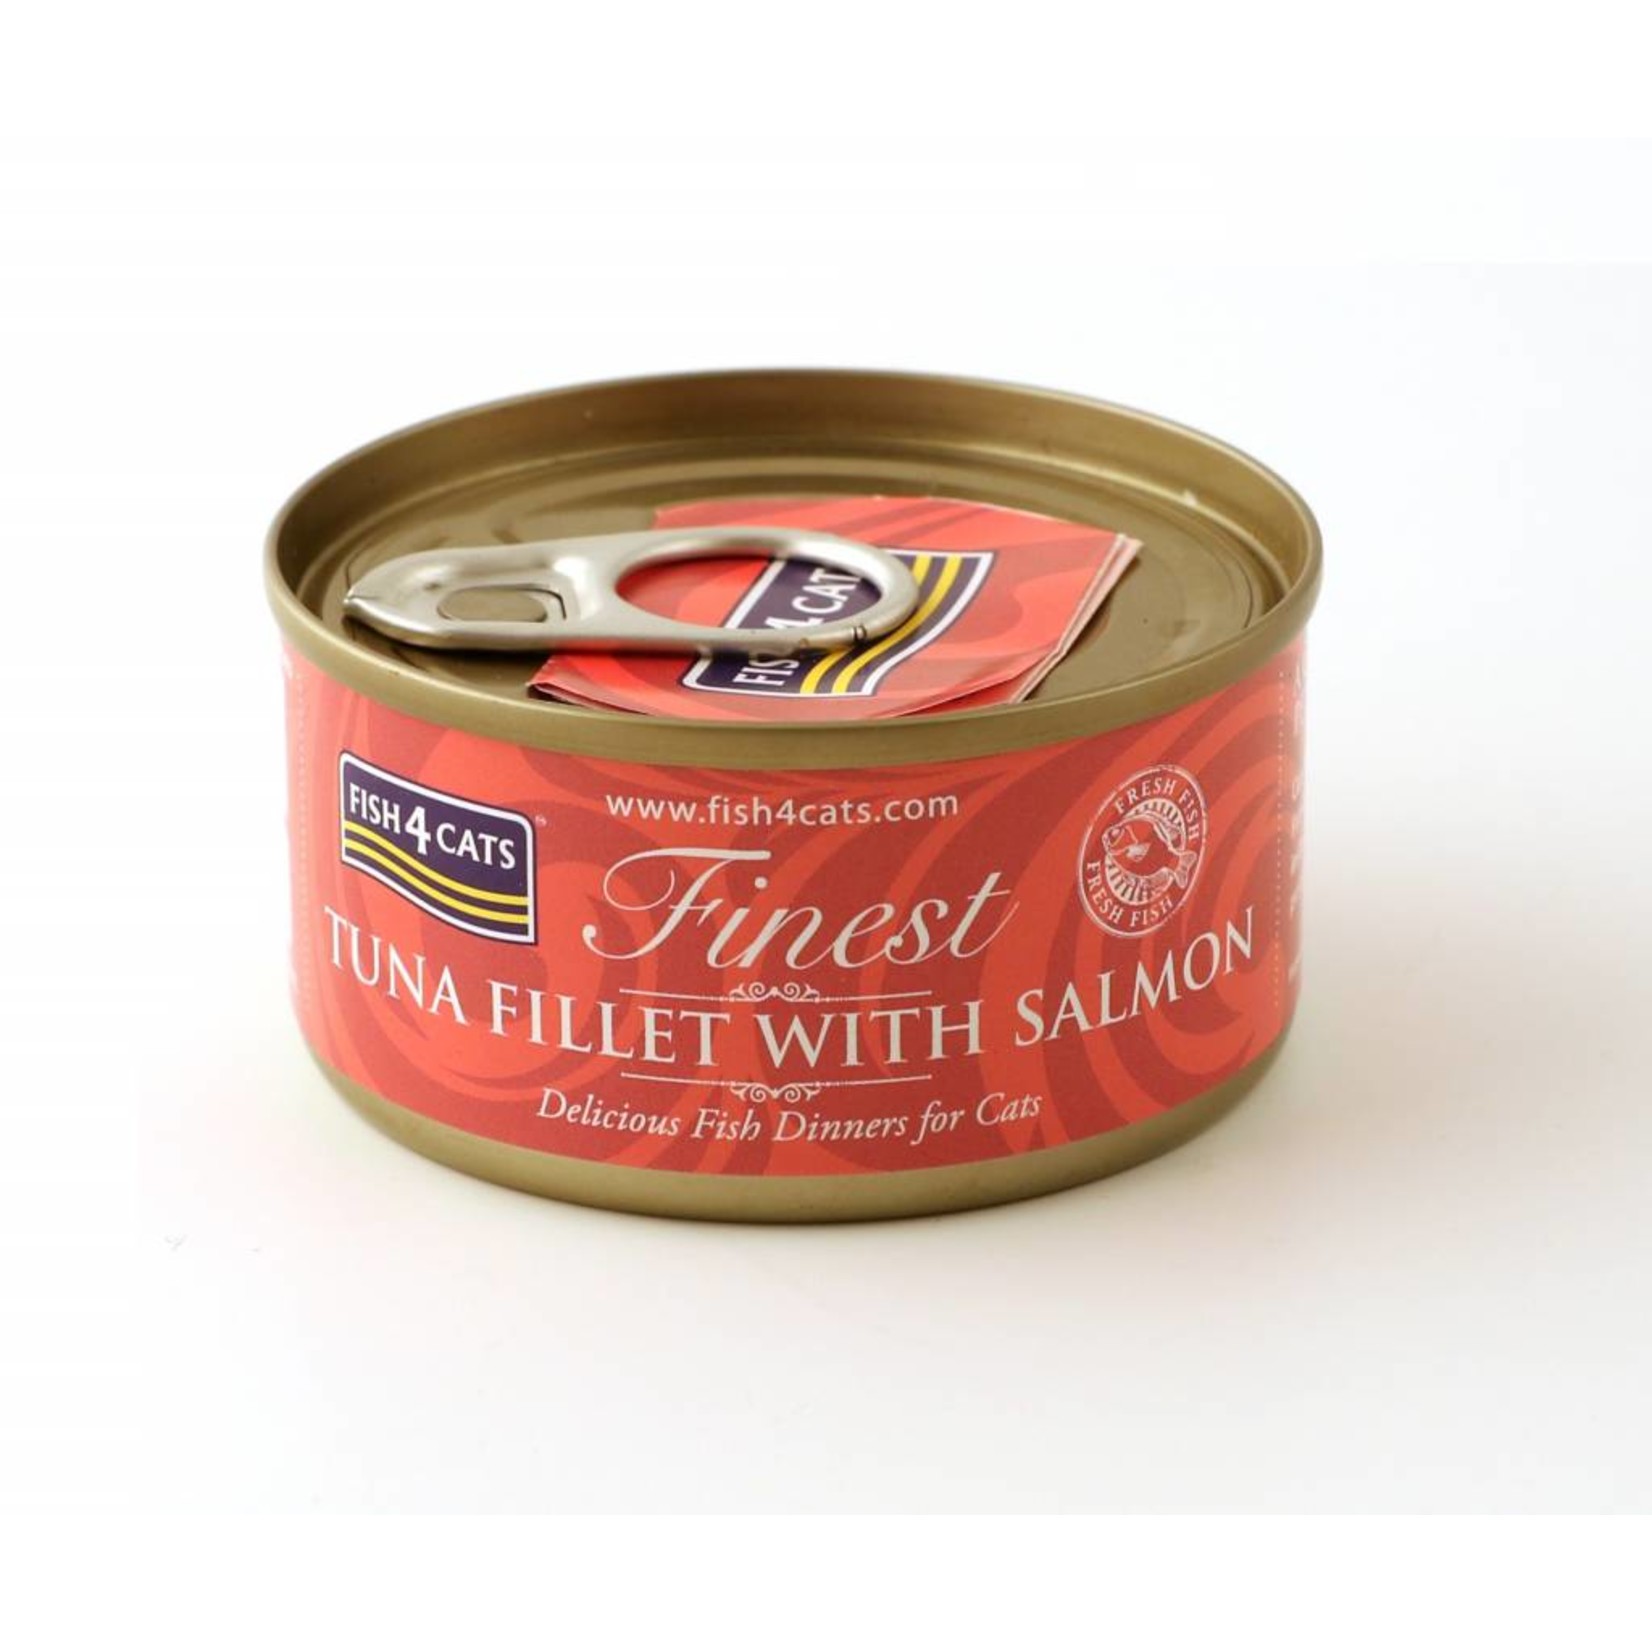 Fish4Cats Finest Tuna Fillet with Salmon Wet Cat Food, 70g can